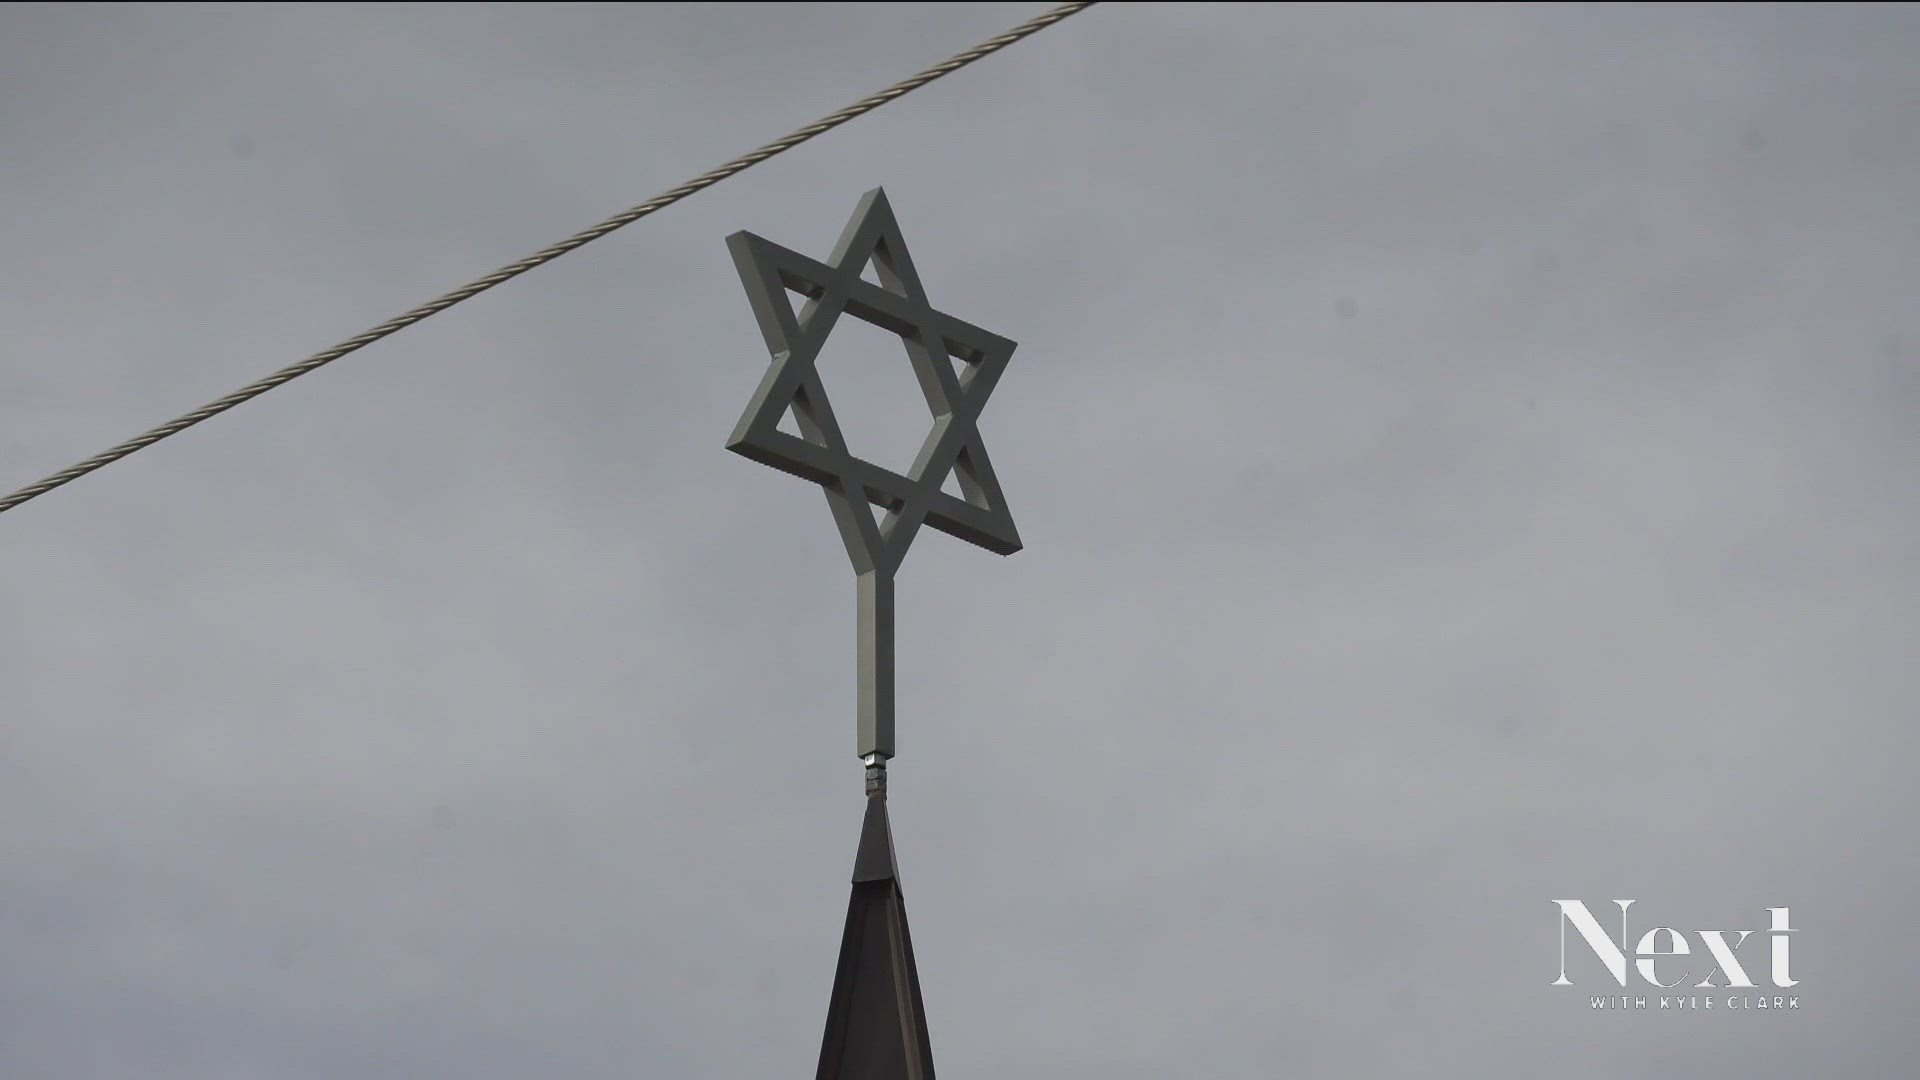 A report from the Anti-Defamation League shows that across the county there has been a 140% increase in anti-Semitic incidents since 2022. In Colorado, it's at 199%.